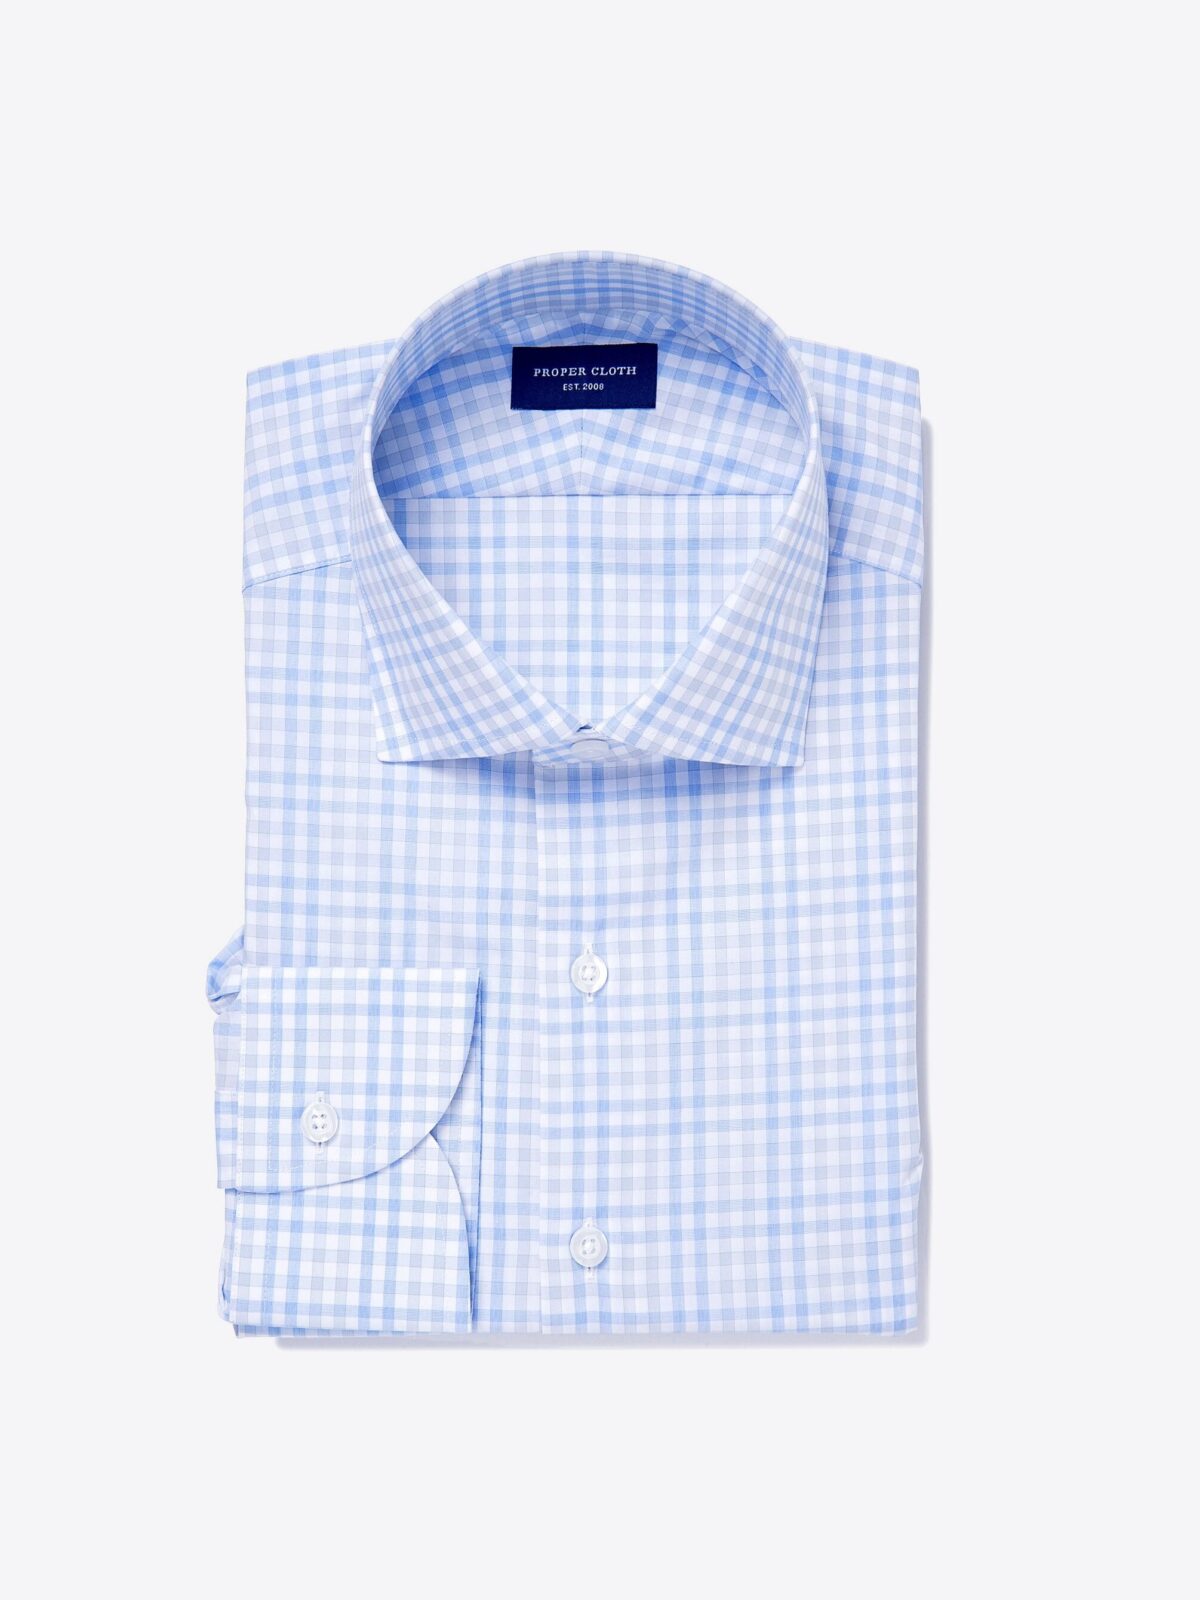 Adams Grey and Blue Multi Check Fitted Dress Shirt Shirt by Proper Cloth